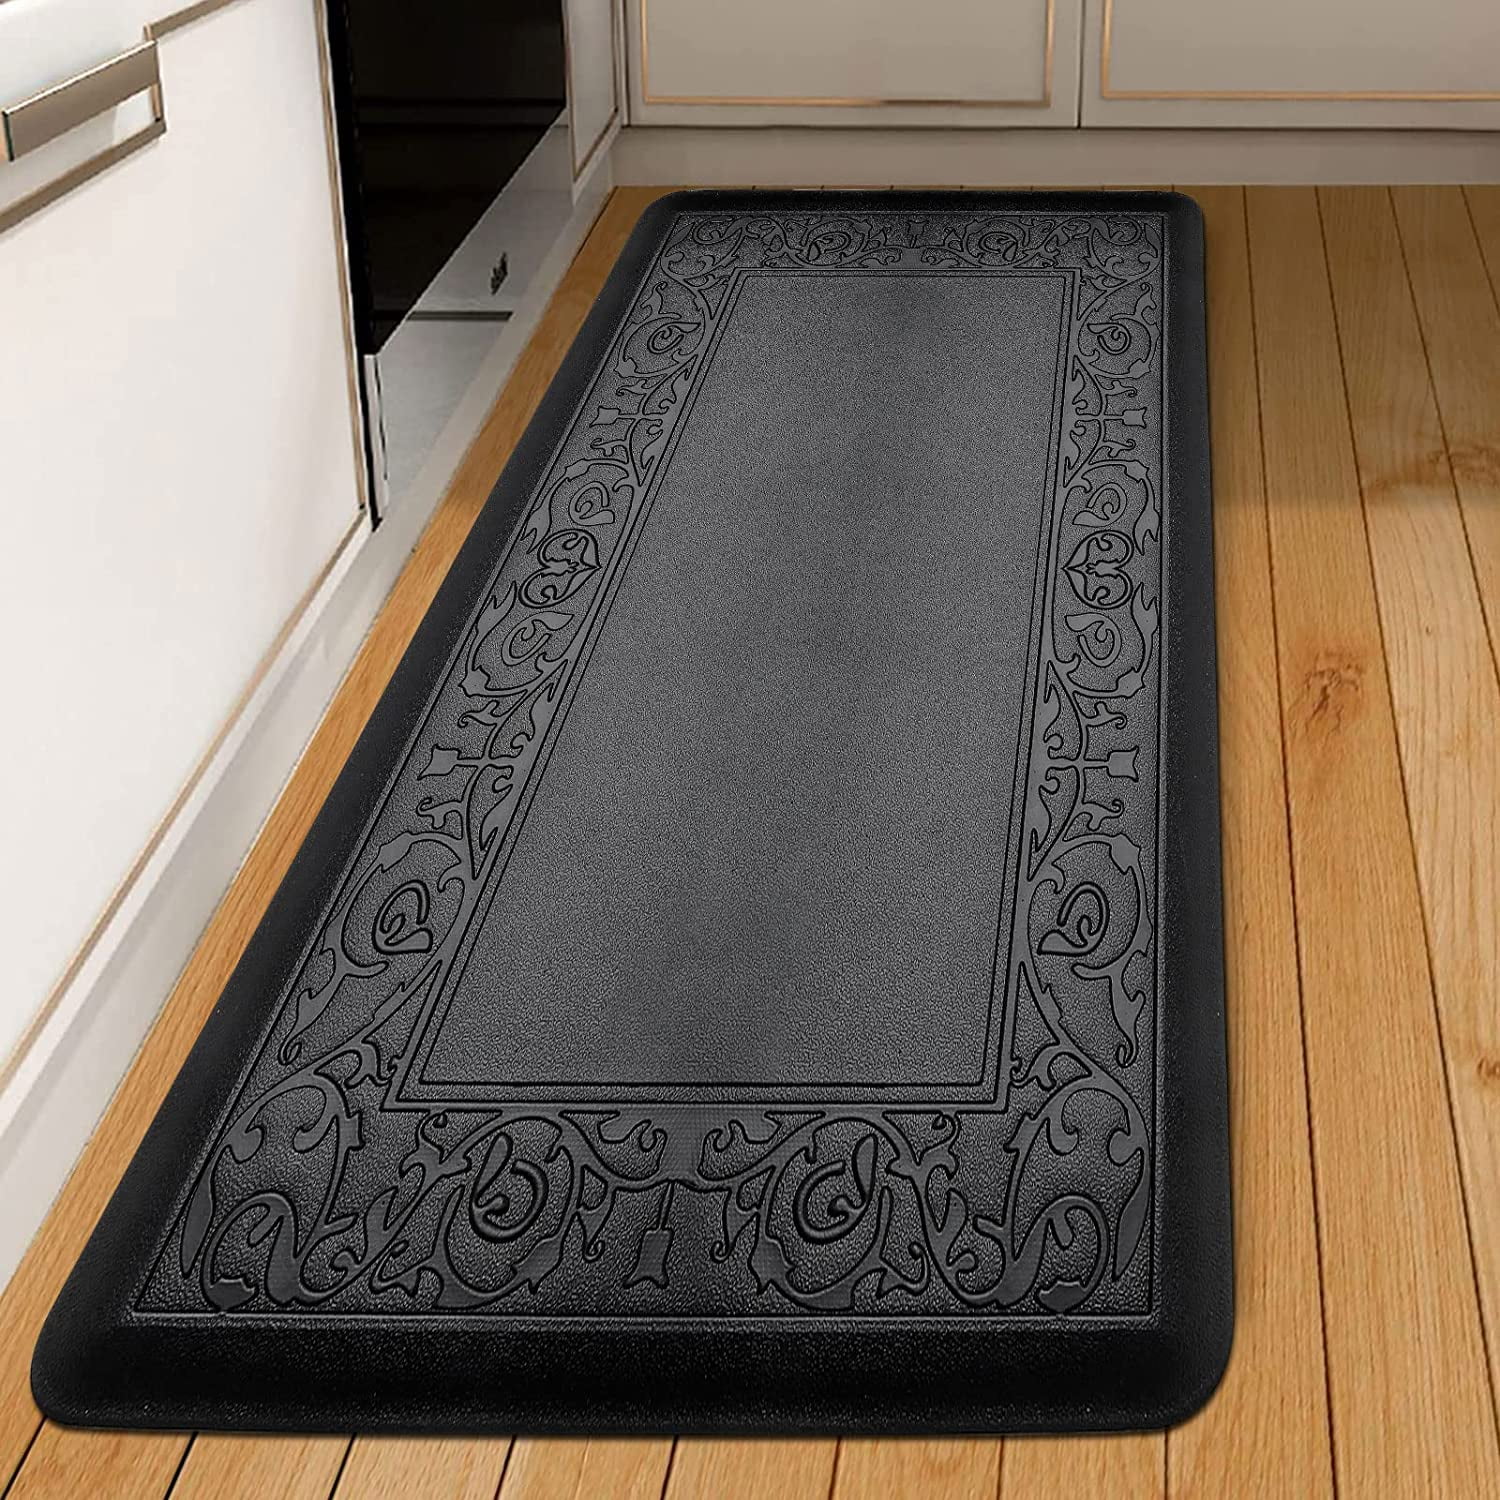  WISELIFE Kitchen Mat Cushioned Anti Fatigue Floor Mat,17.3x39,Thick  Non Slip Waterproof Kitchen Rugs and Mats,Heavy Duty PVC Foam Standing Mat  for Kitchen,Floor,Home,Desk,Sink,Laundry,Black : Home & Kitchen